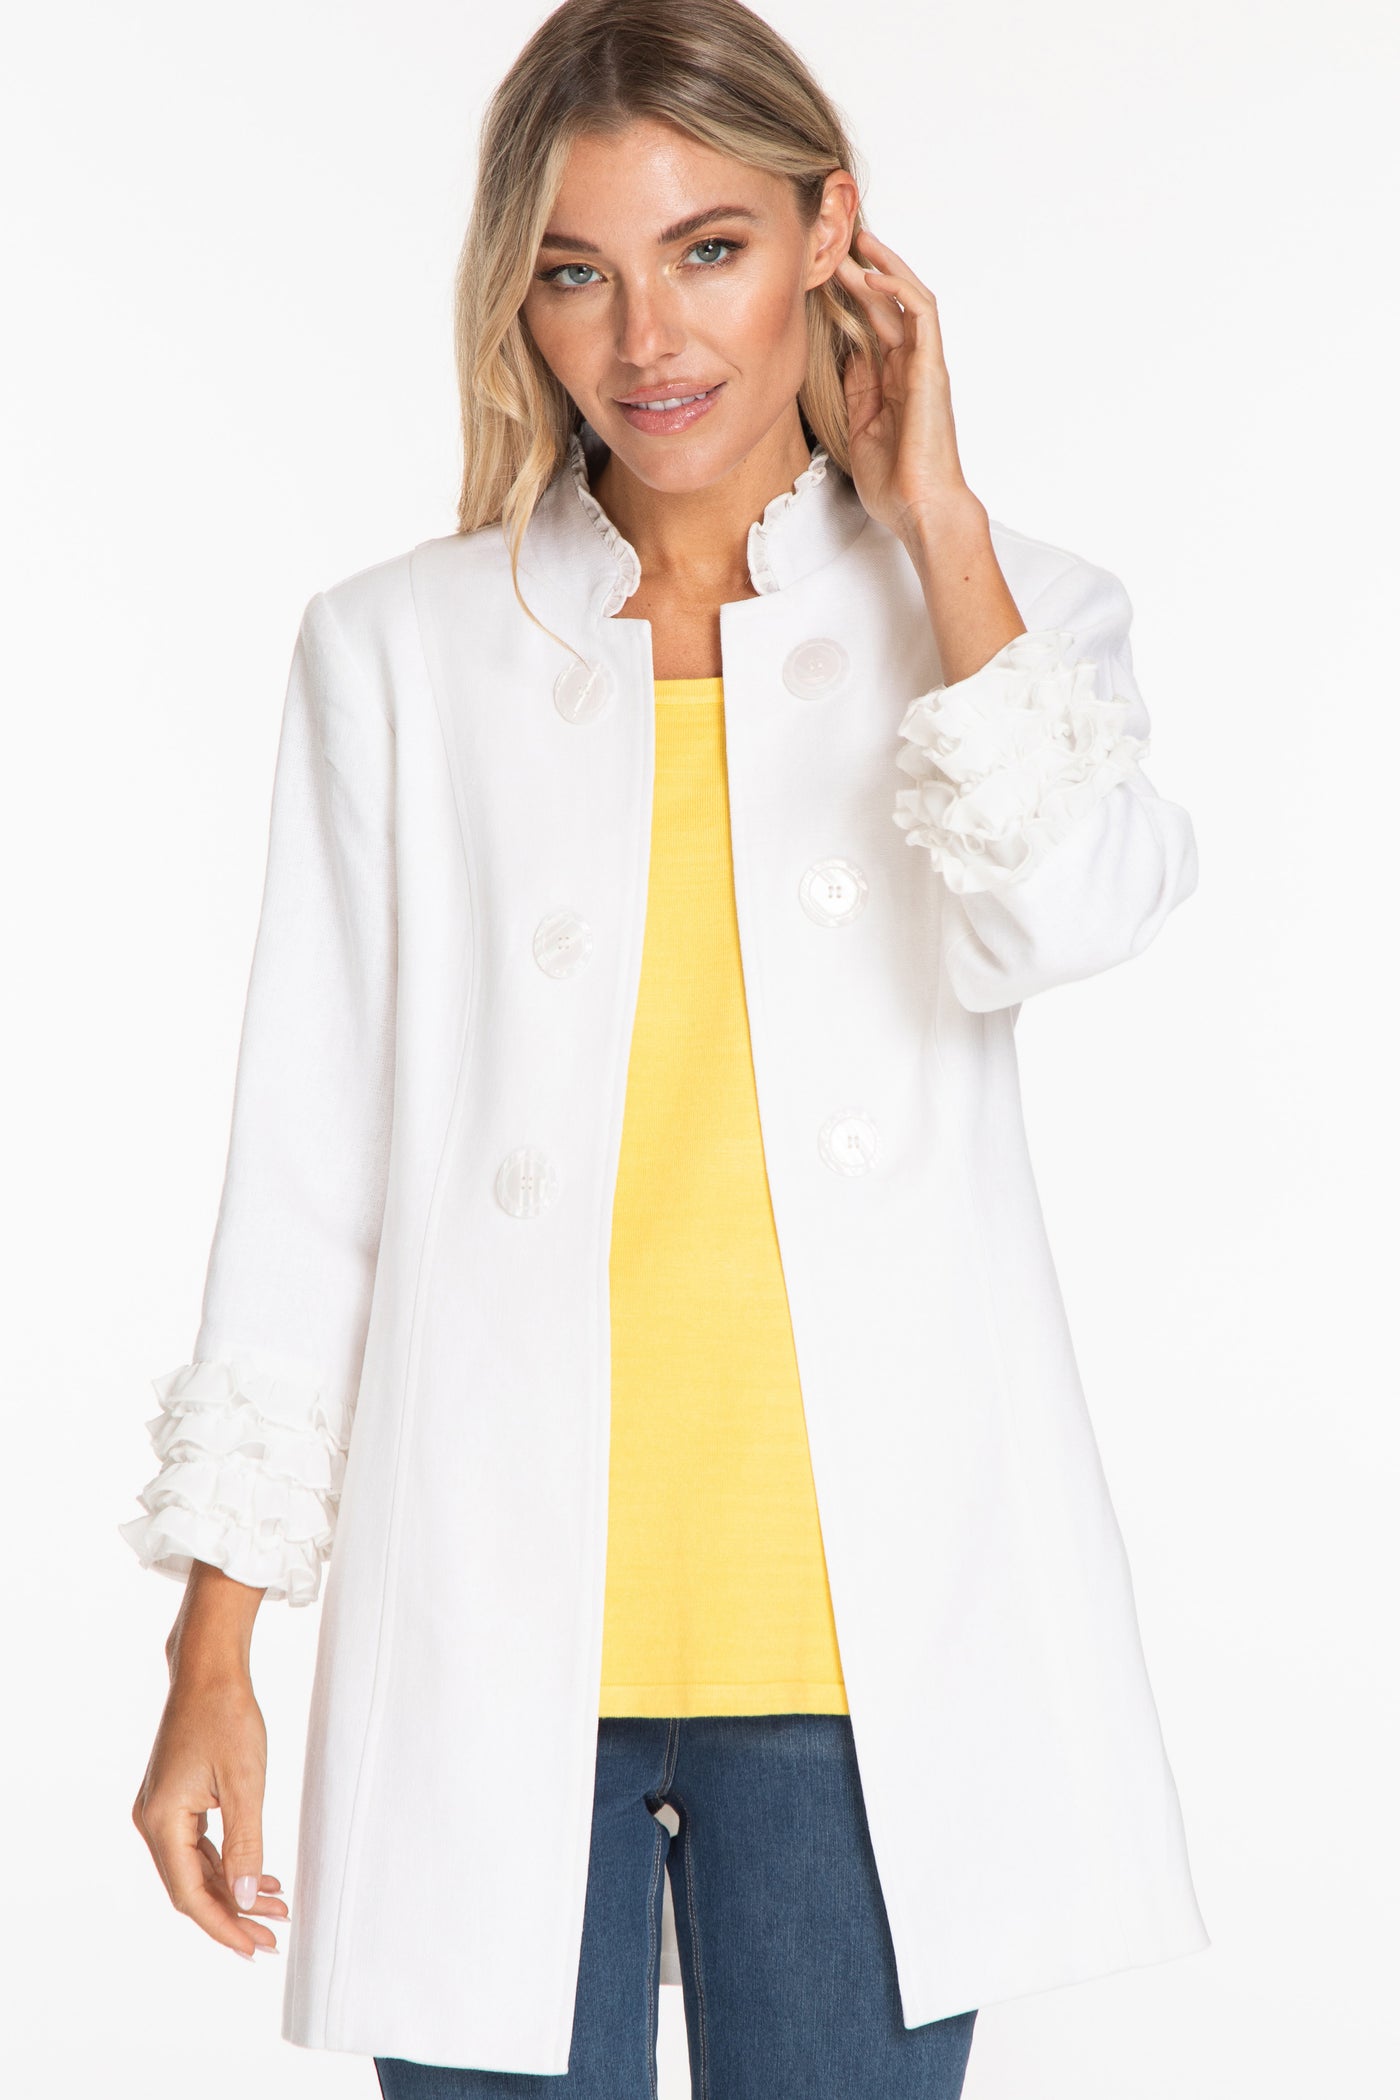 Linen Blend Jacket with Shirred Trim - White